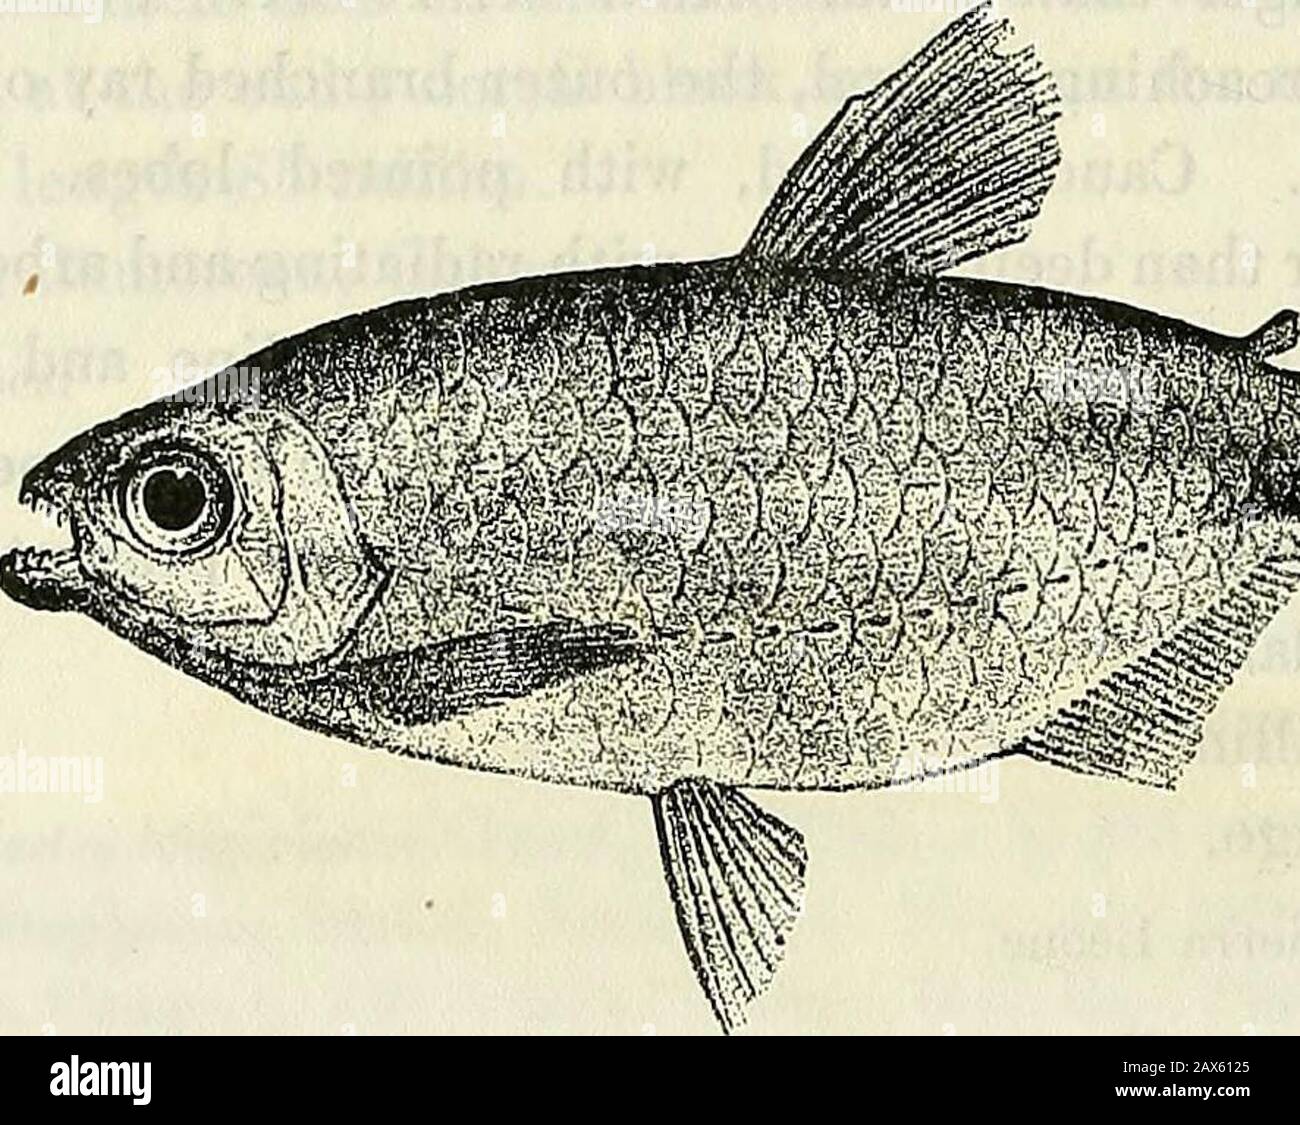 Catalogue of the fresh-water fishes of Africa in the British Museum (Natural History) . ig. 3. Alestes longipinnis, part., Giinth. Proc. Zool. Soc. 1902, ii. p. 338. Depth of body 2§ to 3^ times in total length, length of head 3^ to 4times. Head twice as long as broad, as long as deep; snout shorterthan eye, which is lateral and 2^ to 2-f times in length of head; inter-orbital region convex, its width 2J to 2f times in length of head ;maxillary extending to below anterior border of eye; 14 teeth (g) inupper jaw, 10 (|) in lower; lower border of second suborbital as long asor a little shorter t Stock Photo